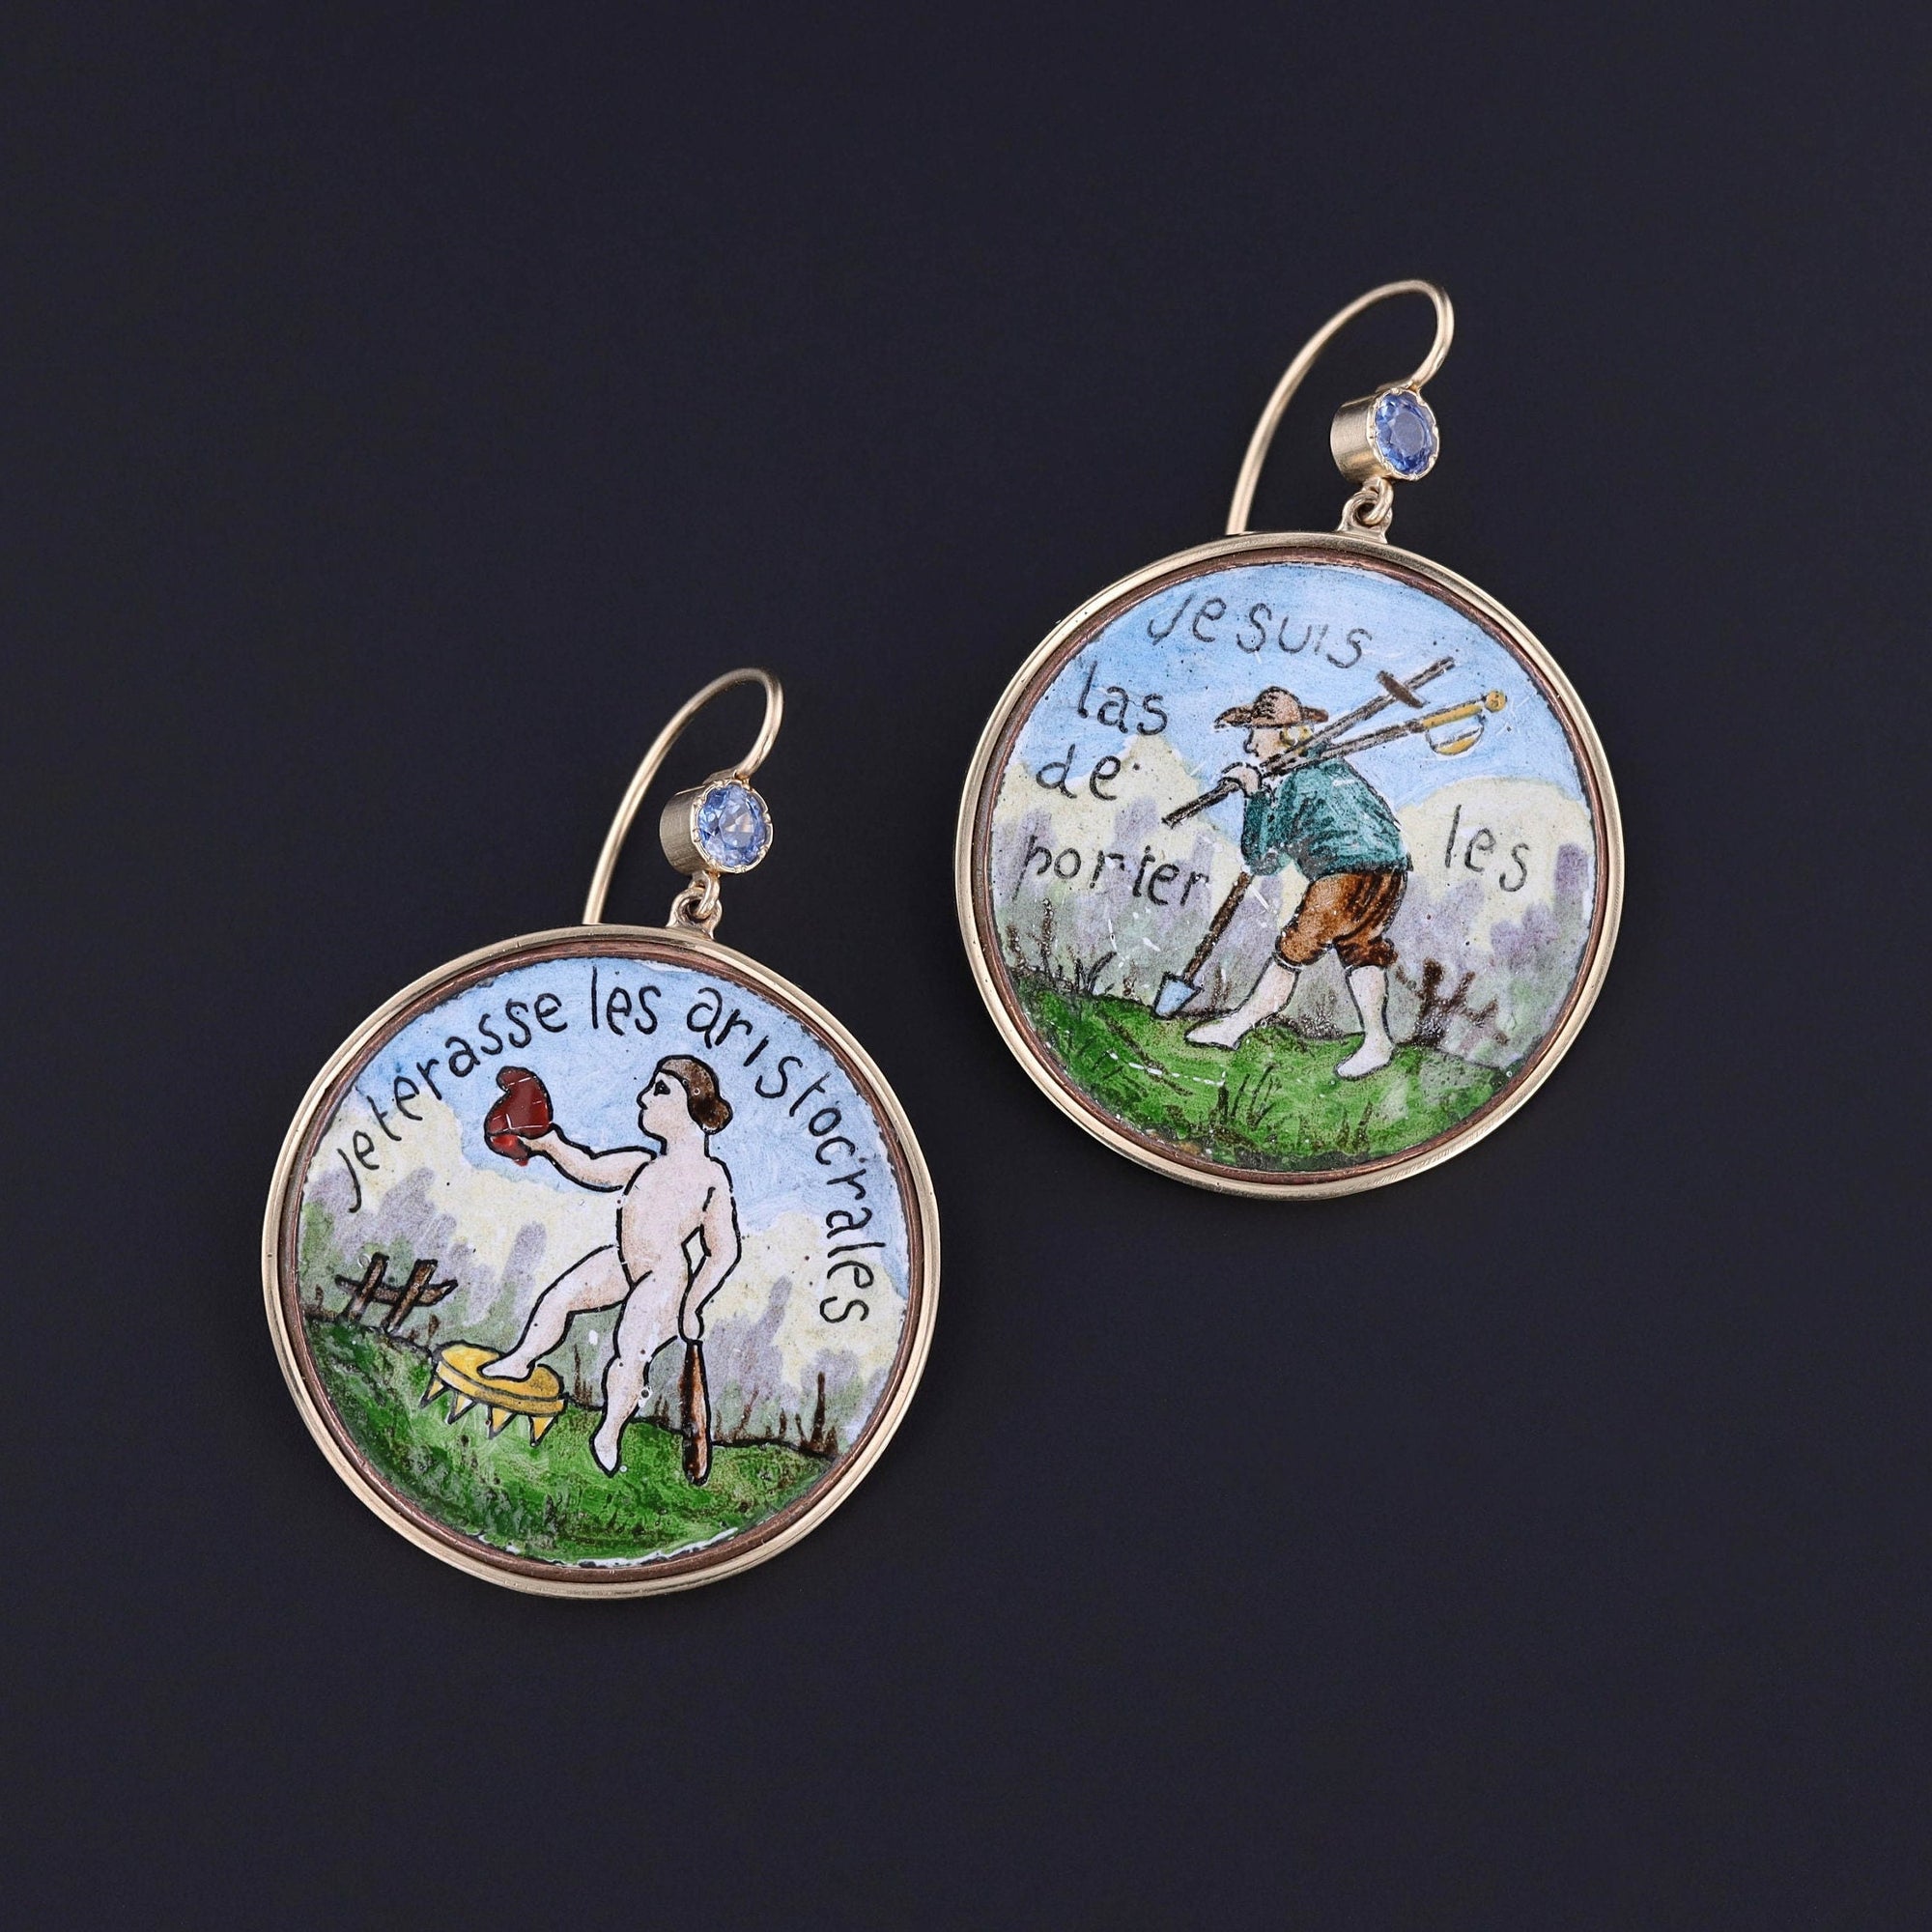 An extraordinary pair of earrings created from very rare buttons dating to the time of the French Revolution (1789-1799). Our jeweler added 14k gold backs and ear wires with sapphire surmounts.